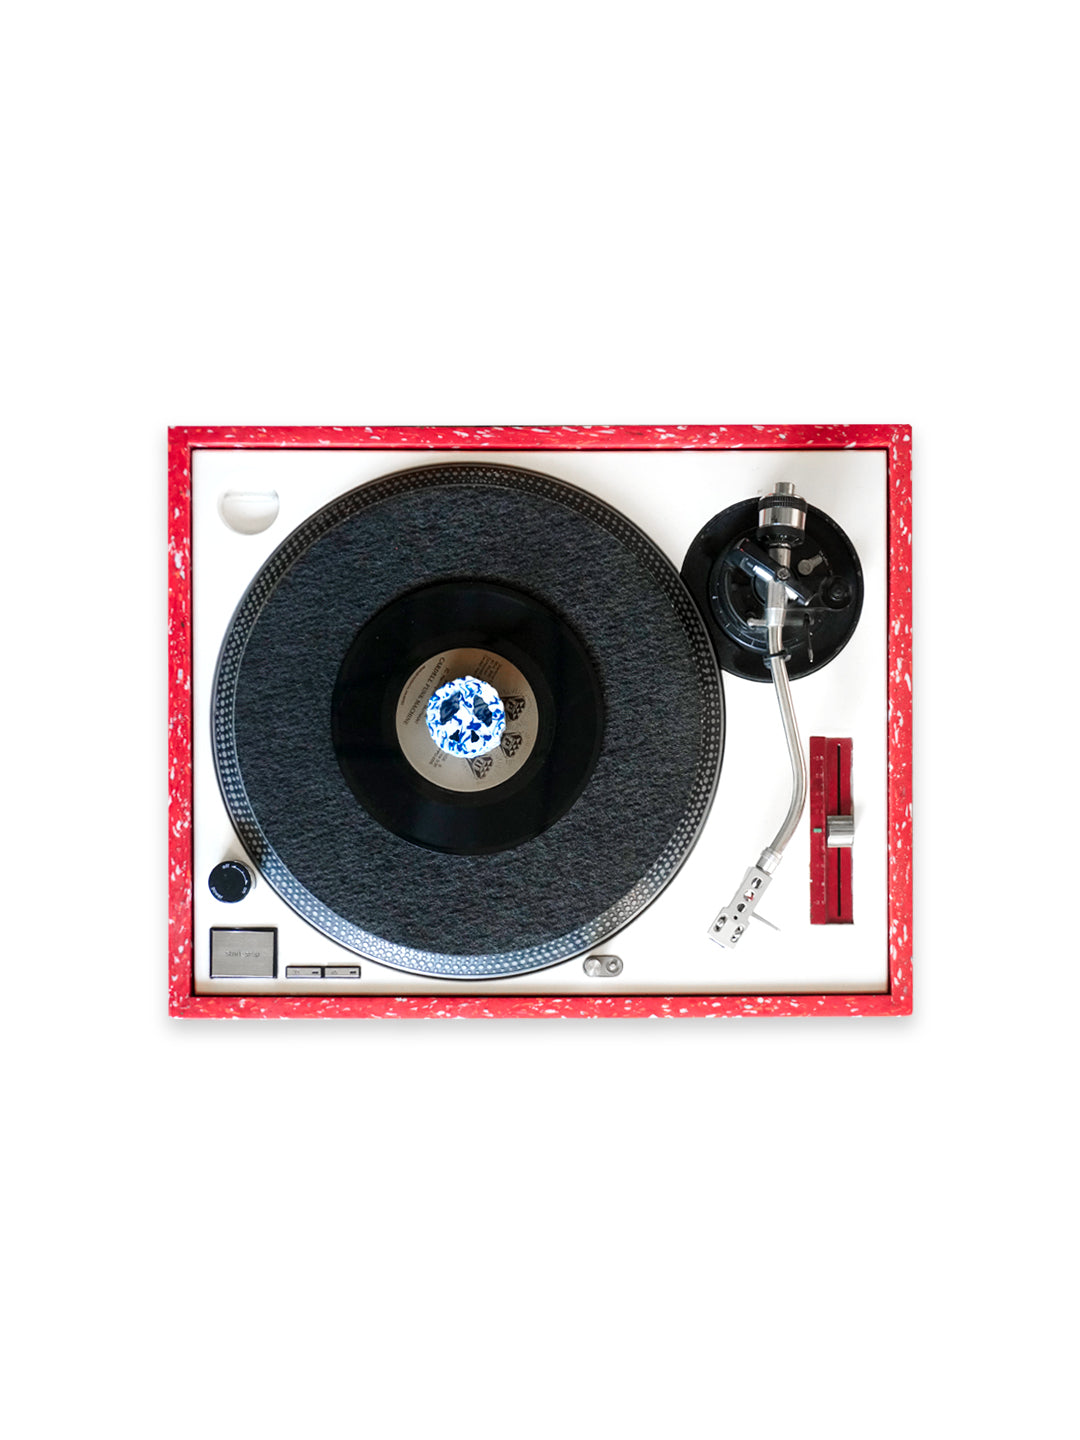 Recycled 7 Inch Vinyl Adapter